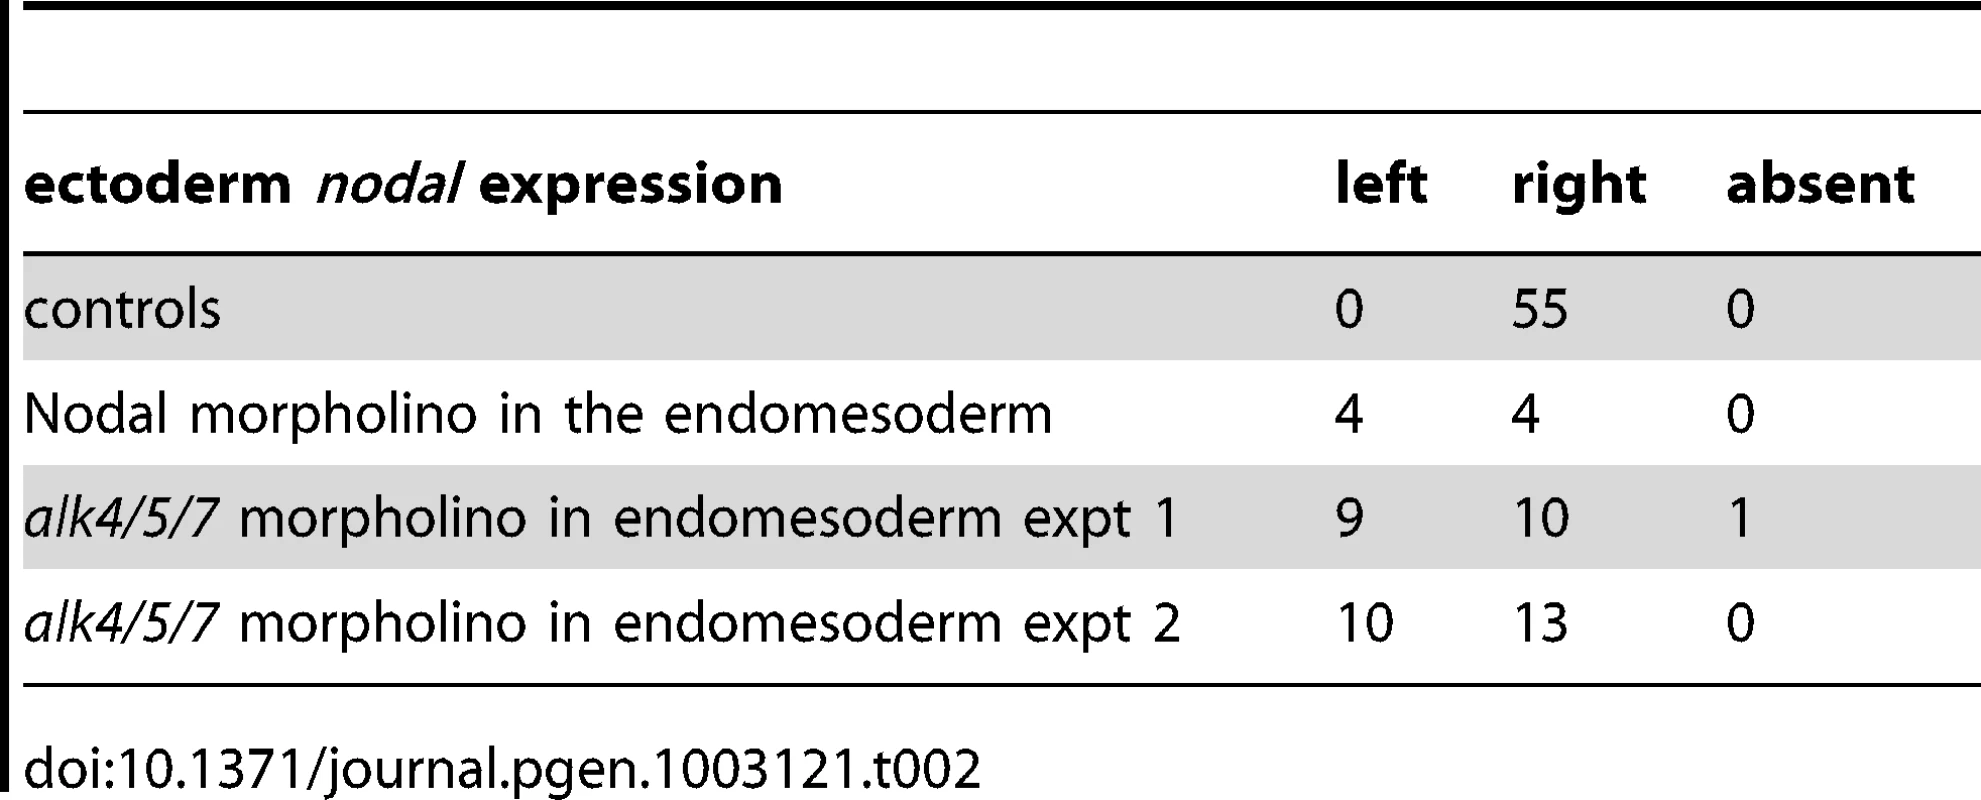 Sidedness of &lt;i&gt;nodal&lt;/i&gt; expression in the ectoderm following inhibition of Nodal signaling in the endomesoderm.